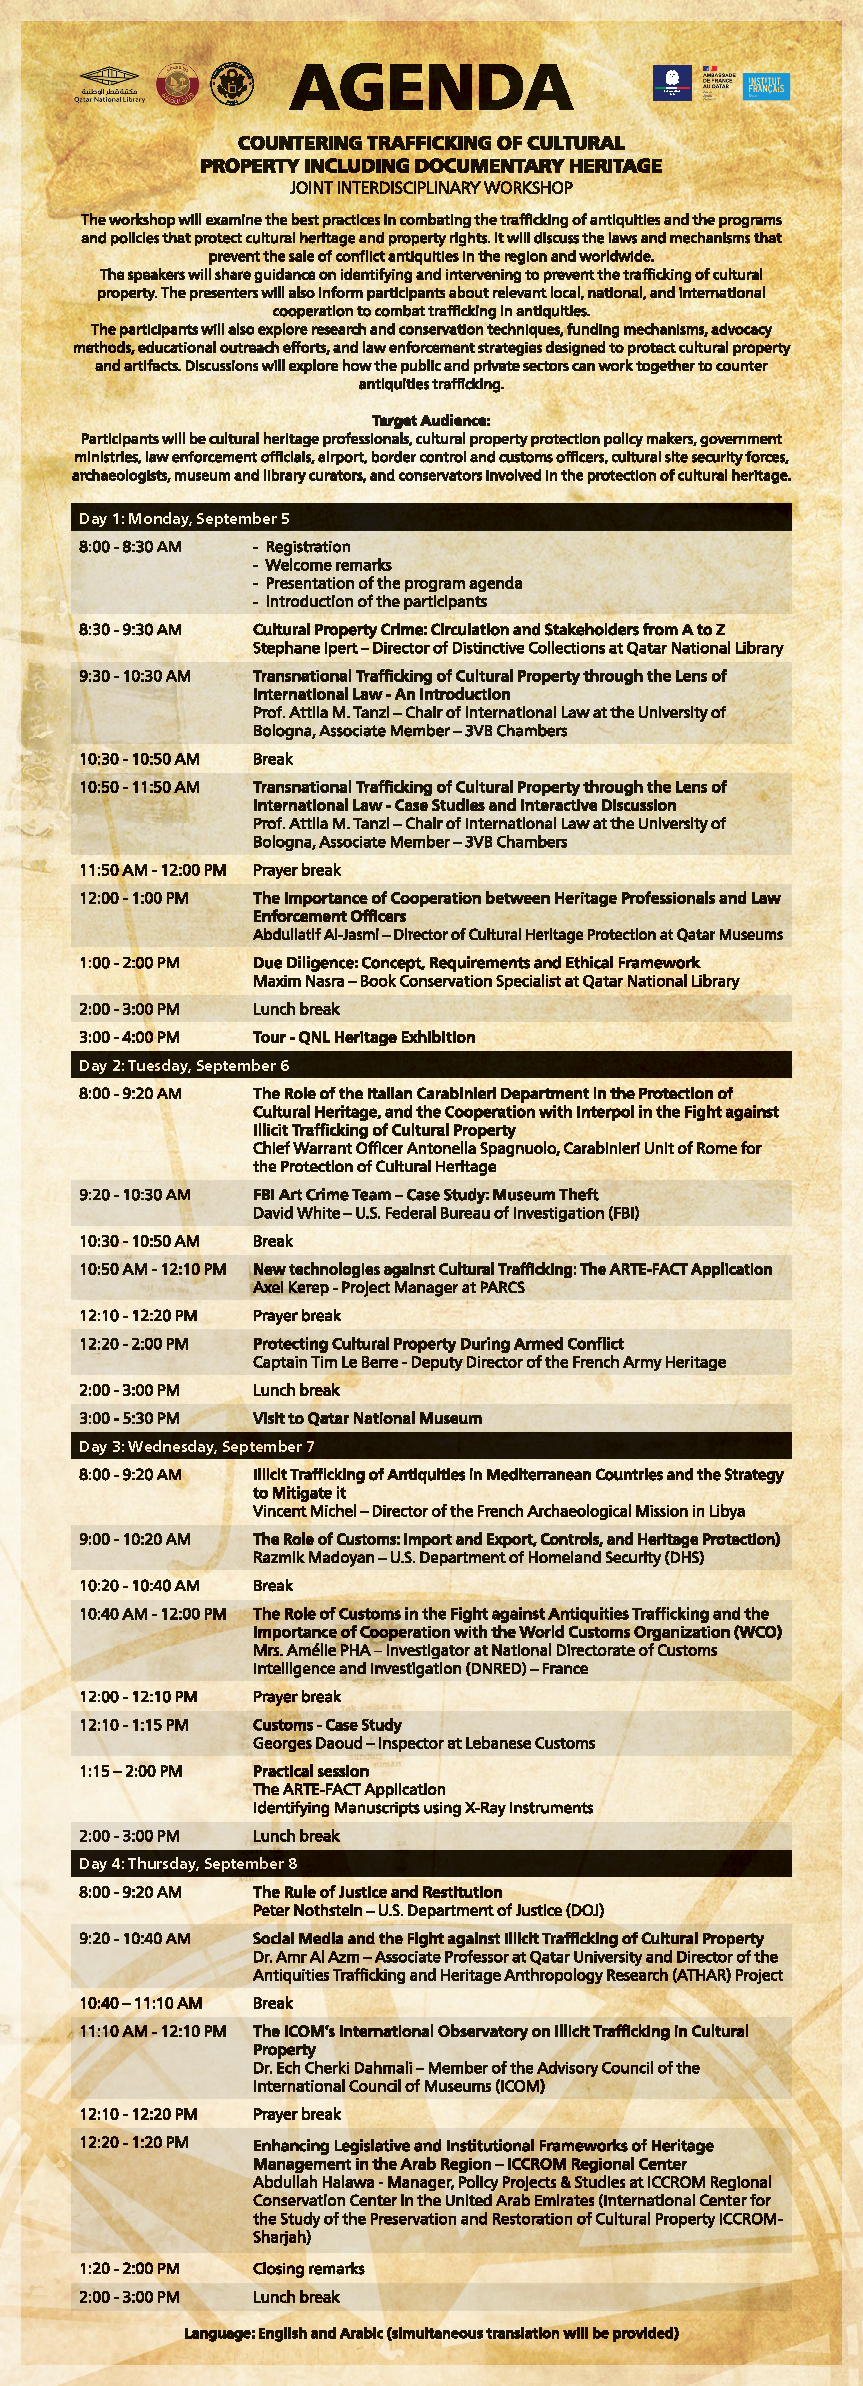 Agenda: Joint Inter-disciplinary Workshop on Countering Trafficking of Cultural Property including Documentary Heritage